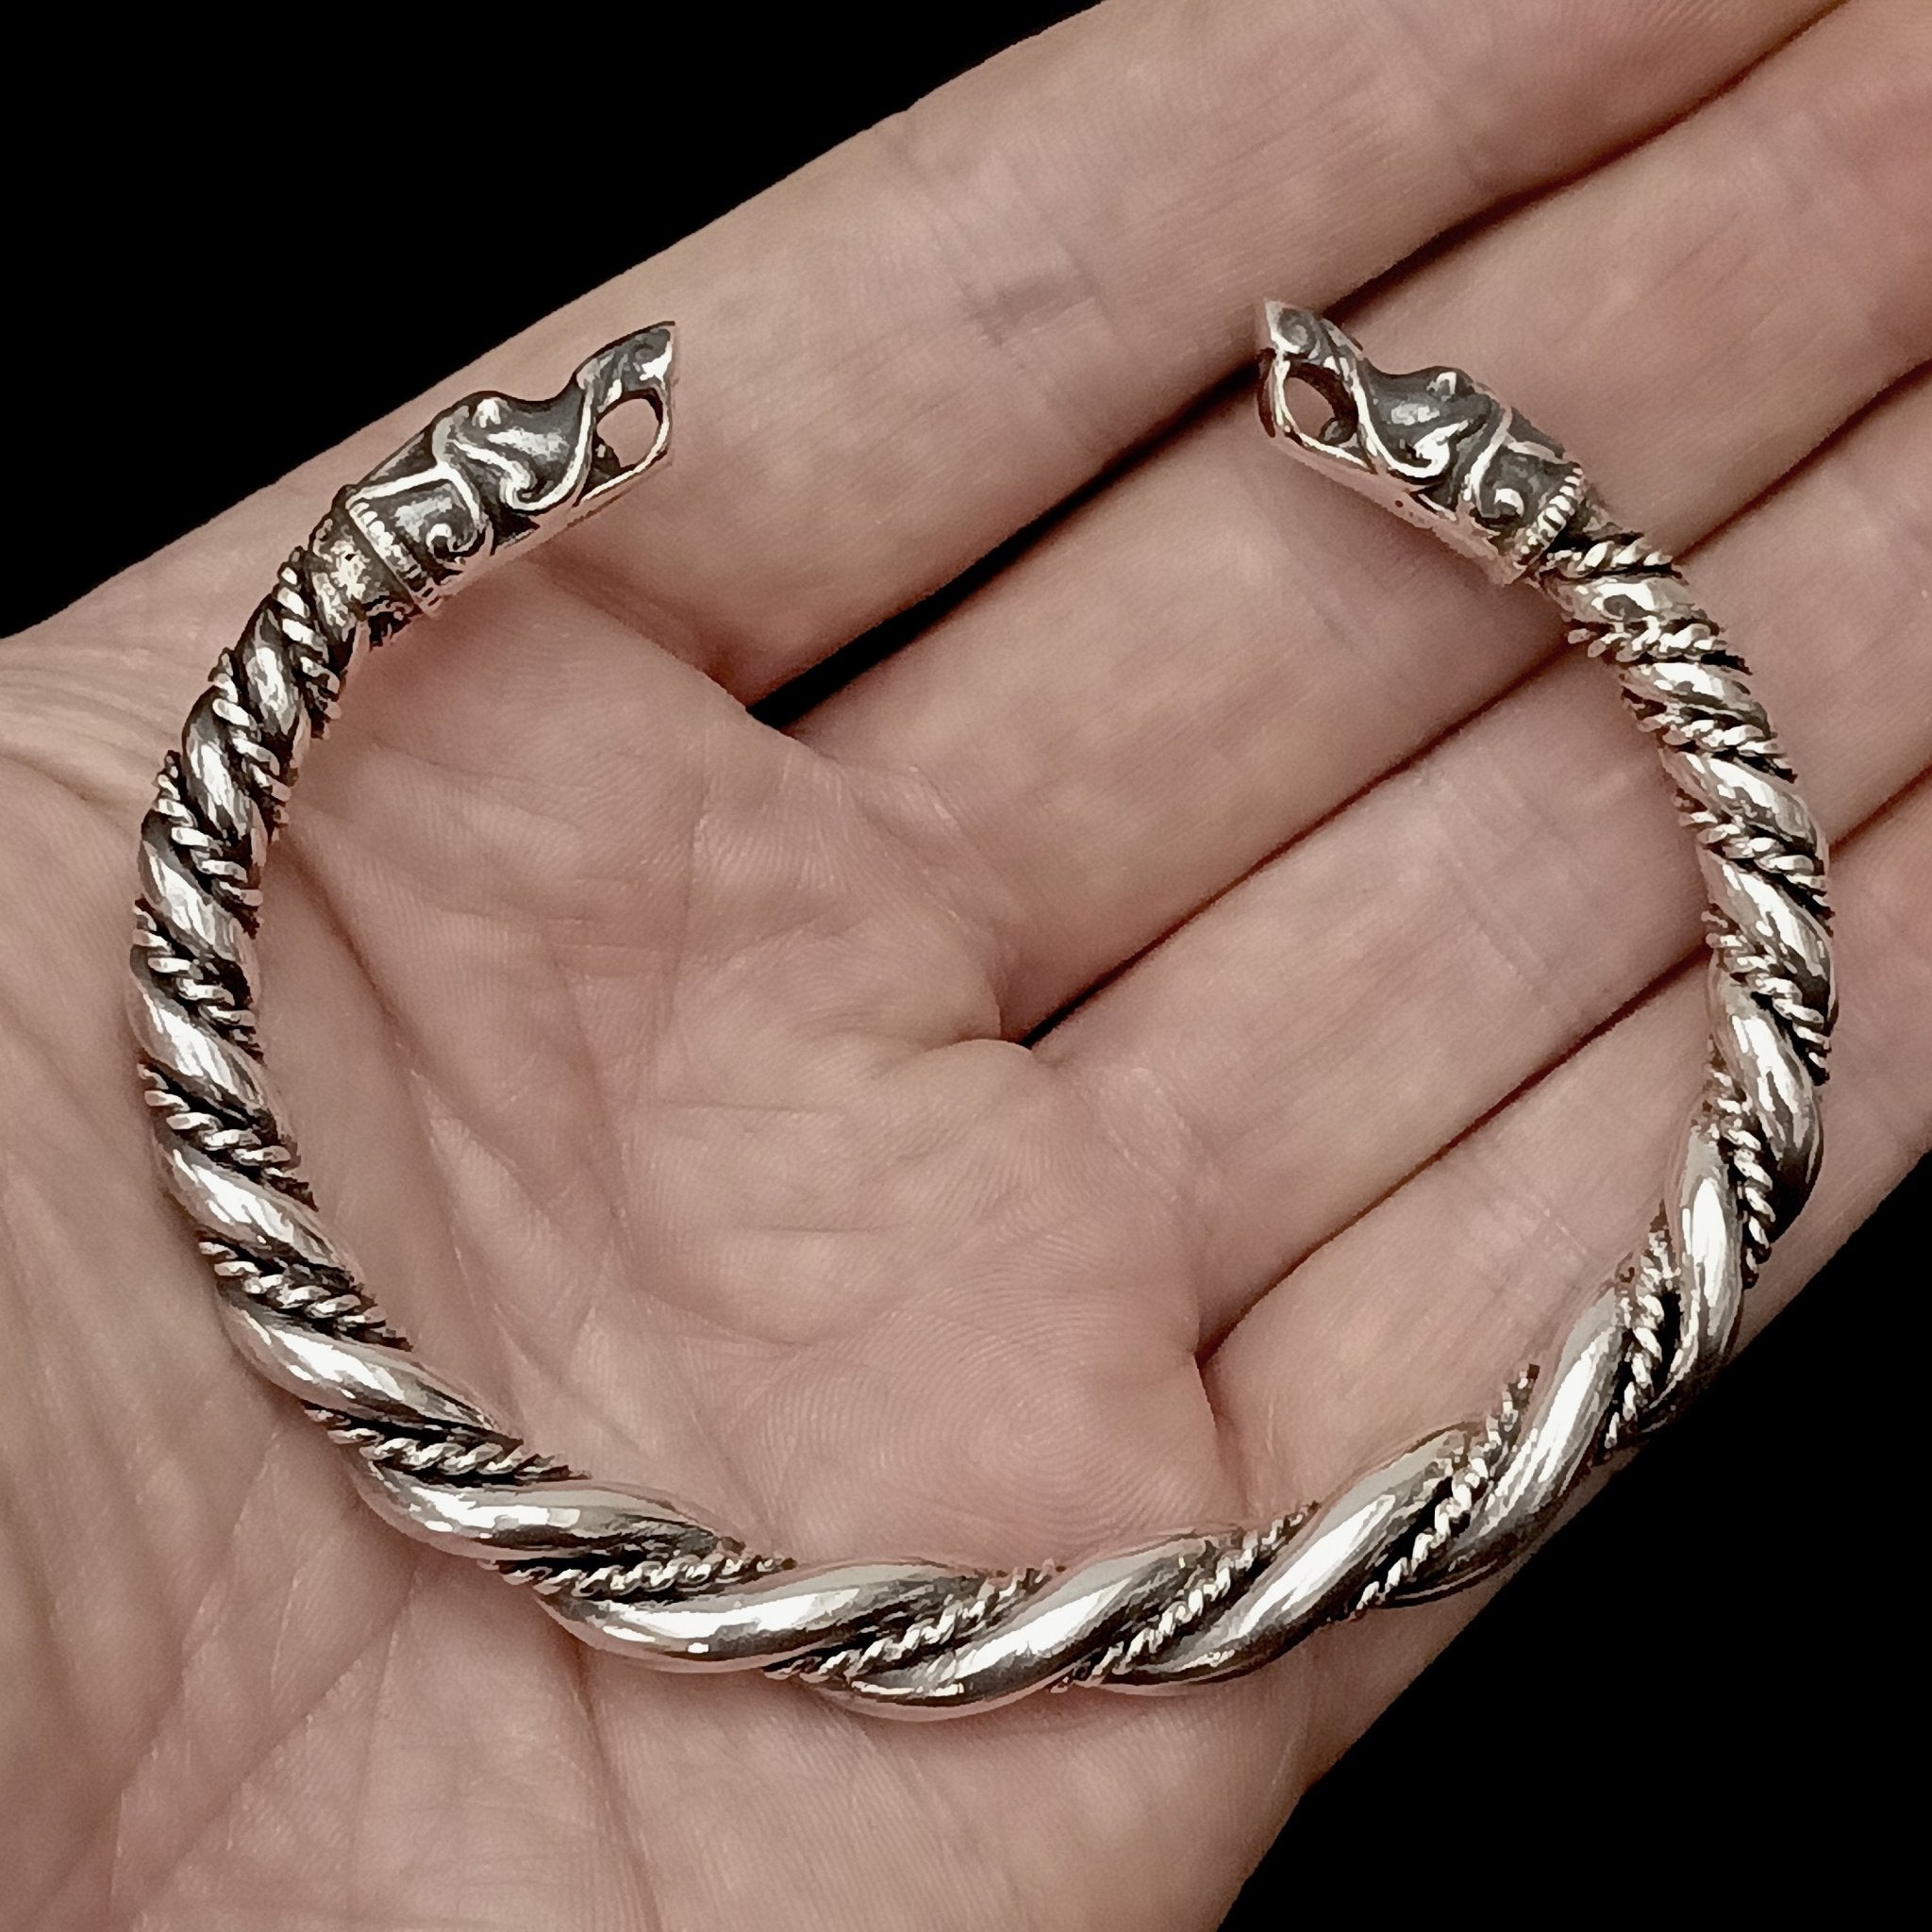 Twisted Silver Arm Ring / Bracelet With Gotlandic Dragon Heads on Hand